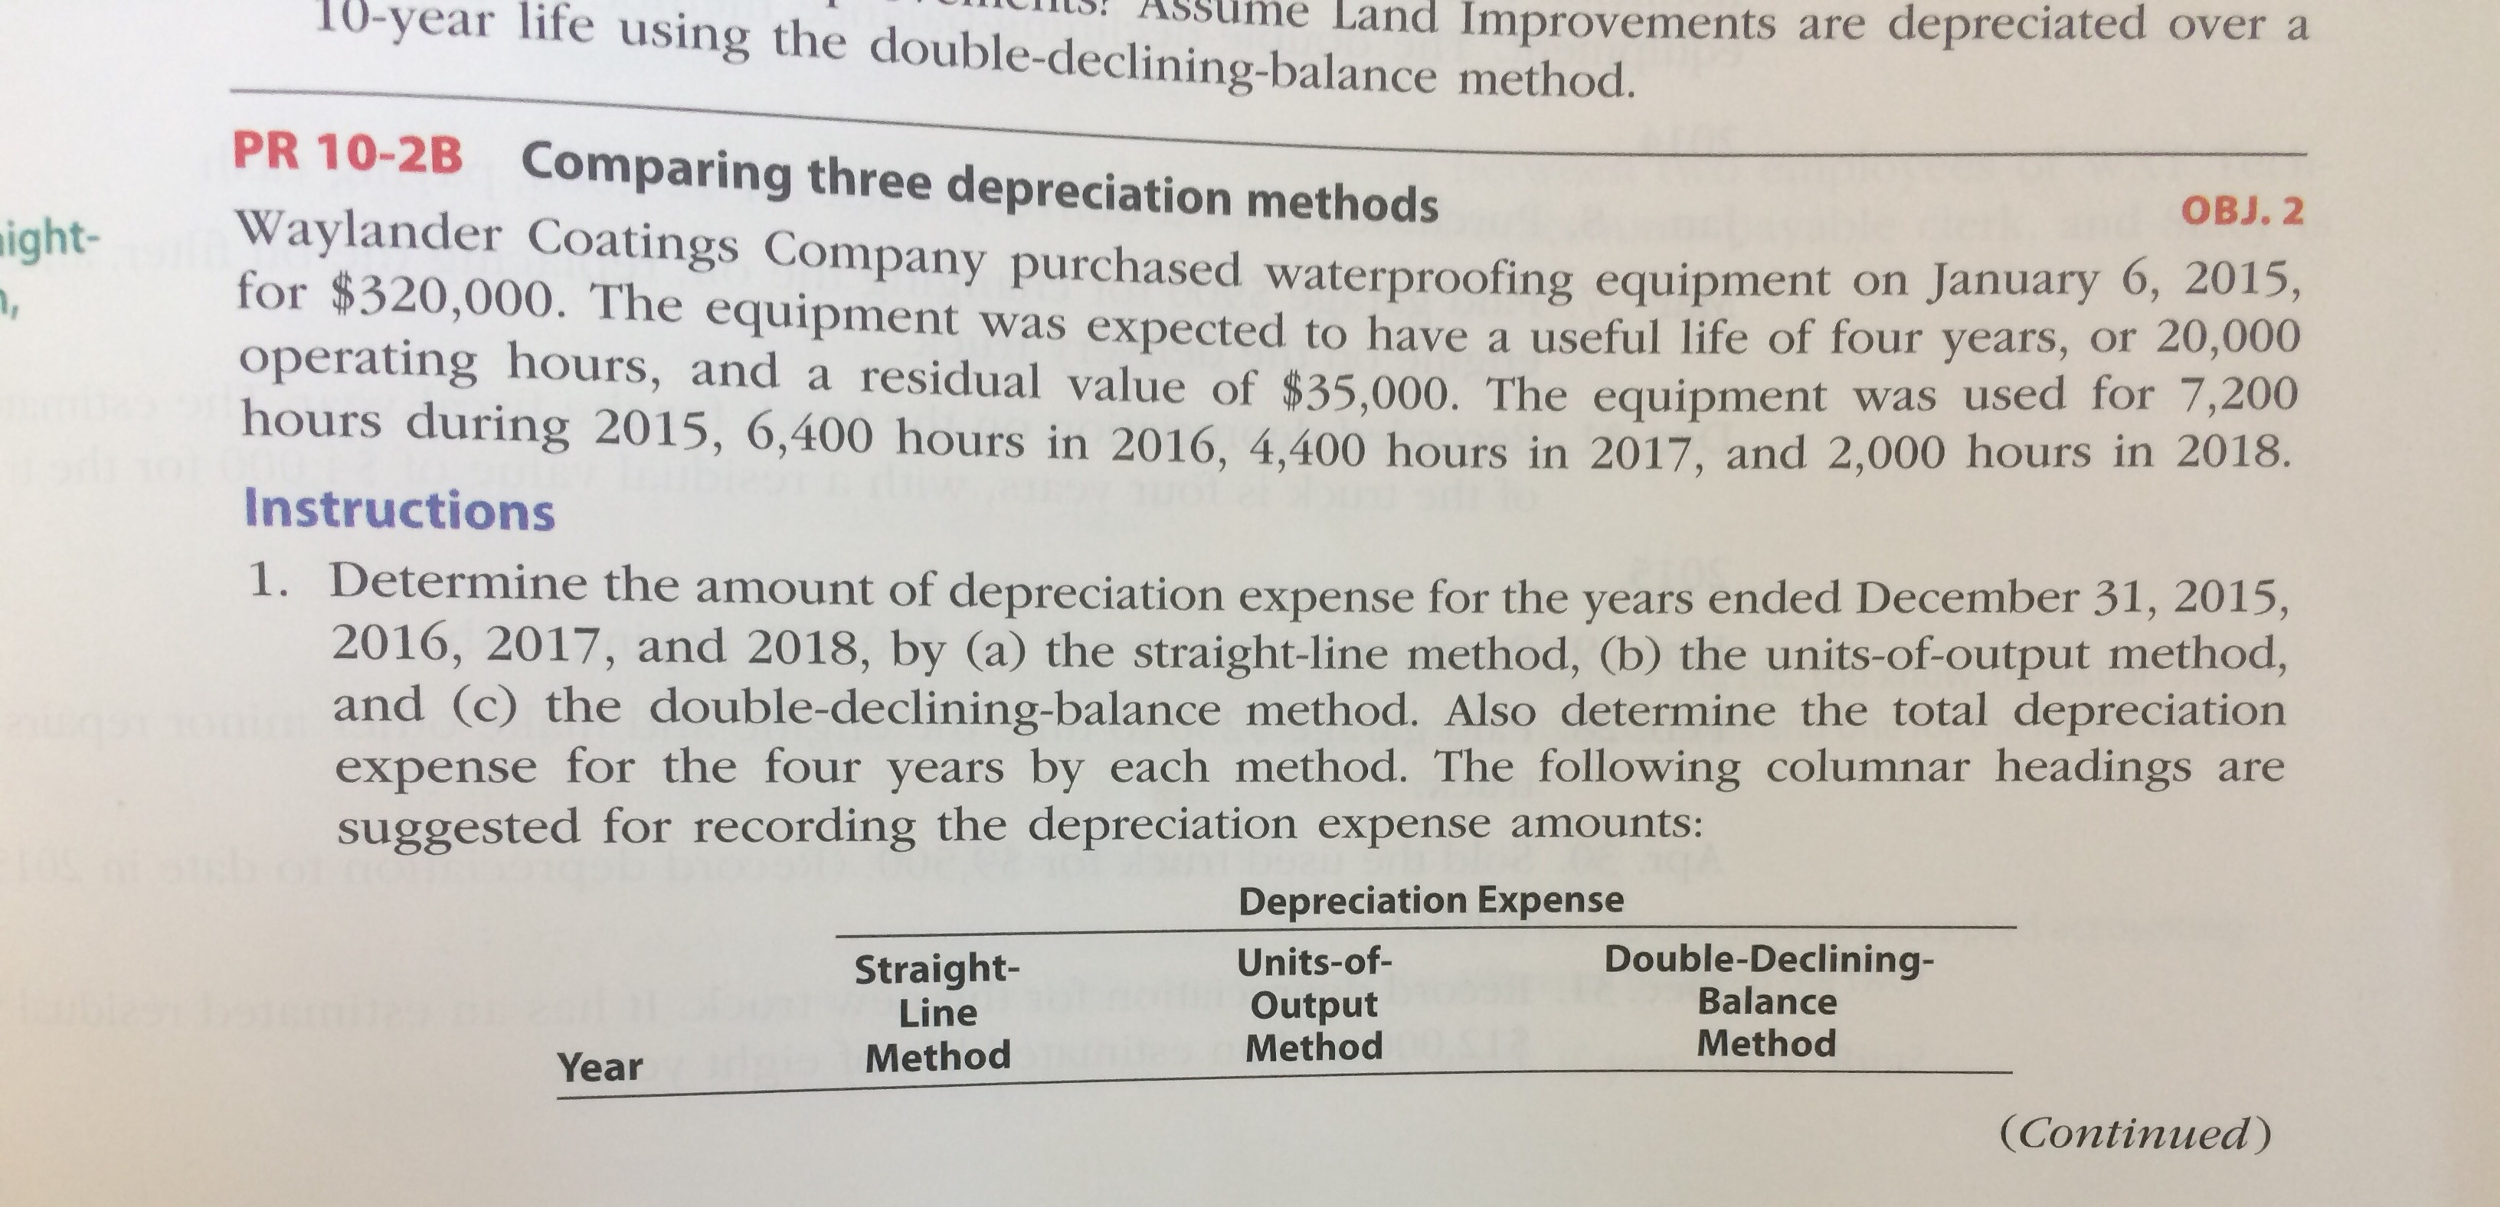 10-year life using the double-declining-balance method are depreciated over a pr 10-2b comparing three depreciation methods waylander obj. 2 for coatings company purchased equipment on january 6, 2015, $320,000. the equipment was expected to have a useful life of four years, or 20,000 operating hours, and a residual value of $35,000. the equipment was used for 7,200 hours during 2015, 6,400 hours in 2016, 4 hours in 2017, and 2,000 hours 2018 instructions ght 1. determine the amount of depreciation expense for the years ended december 31, 2015, 2016, 2017, and 2018, by (a) the straight-1ine method, (b) the units of output method and c) the double-declining-balance method. also determine the total depreciation expense for the four years by each method. the following columnar headings are suggested for recording the depreciation expense amounts depreciation expense double-declining- units-of- straight- balance output line method method method year (continued)